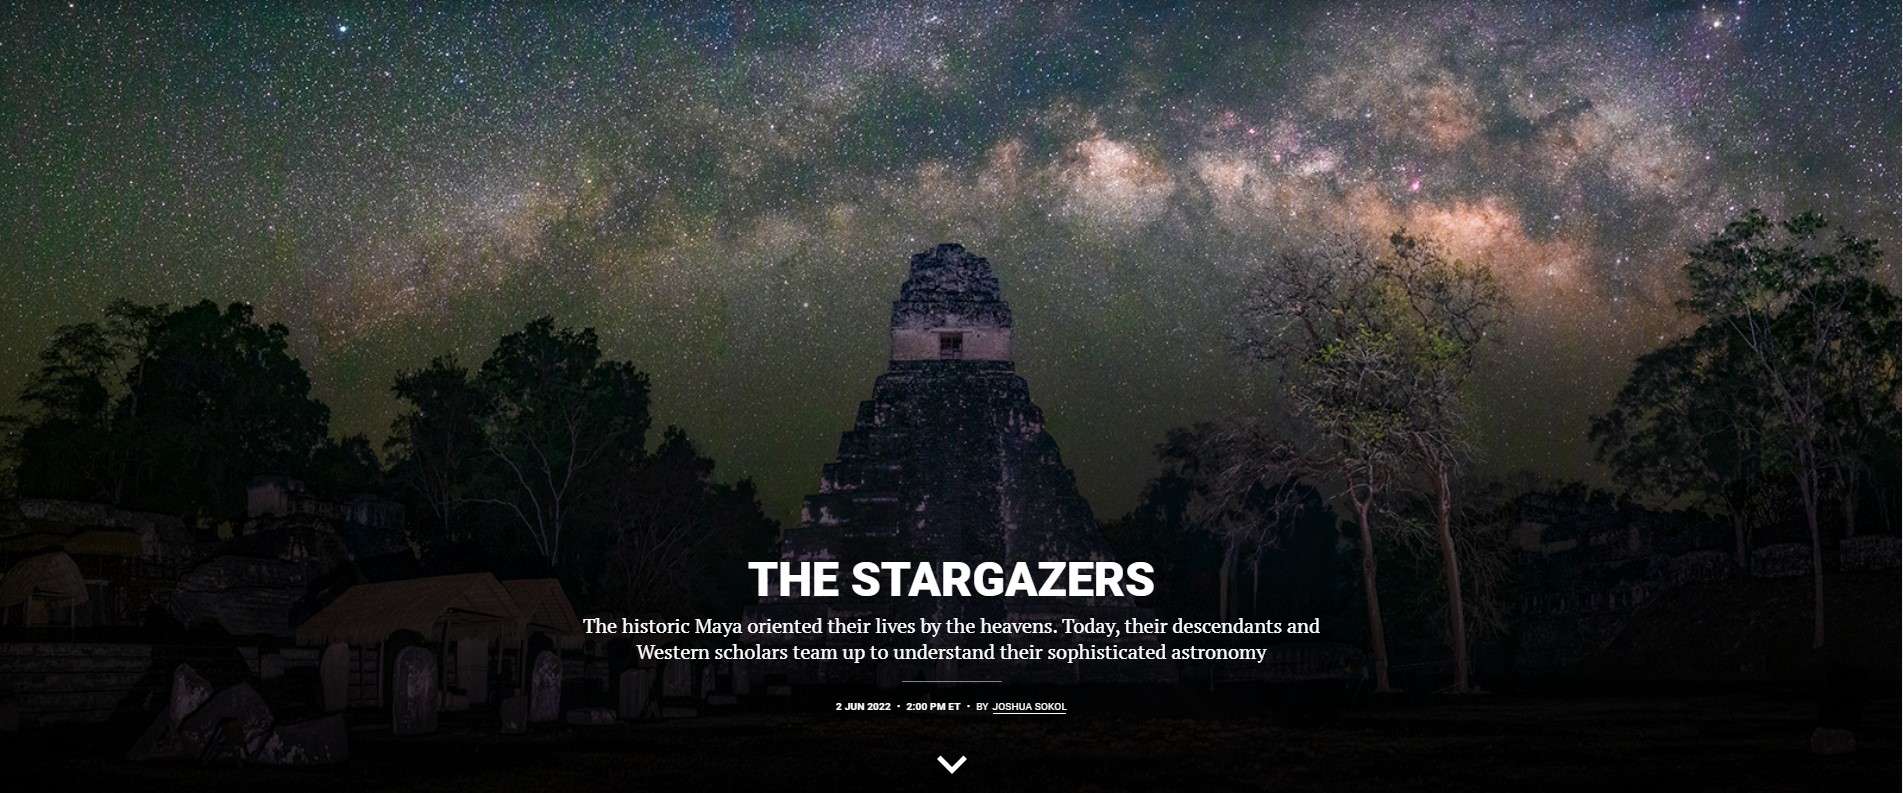 This photograph shows an ancient Maya temple with a backdrop of a starry sky. Text reads: THE STARGAZERS: The historic Maya oriented their lives by the heavens. Today, their descendants and Western scholars team up to understand their sophisticated astronomy.